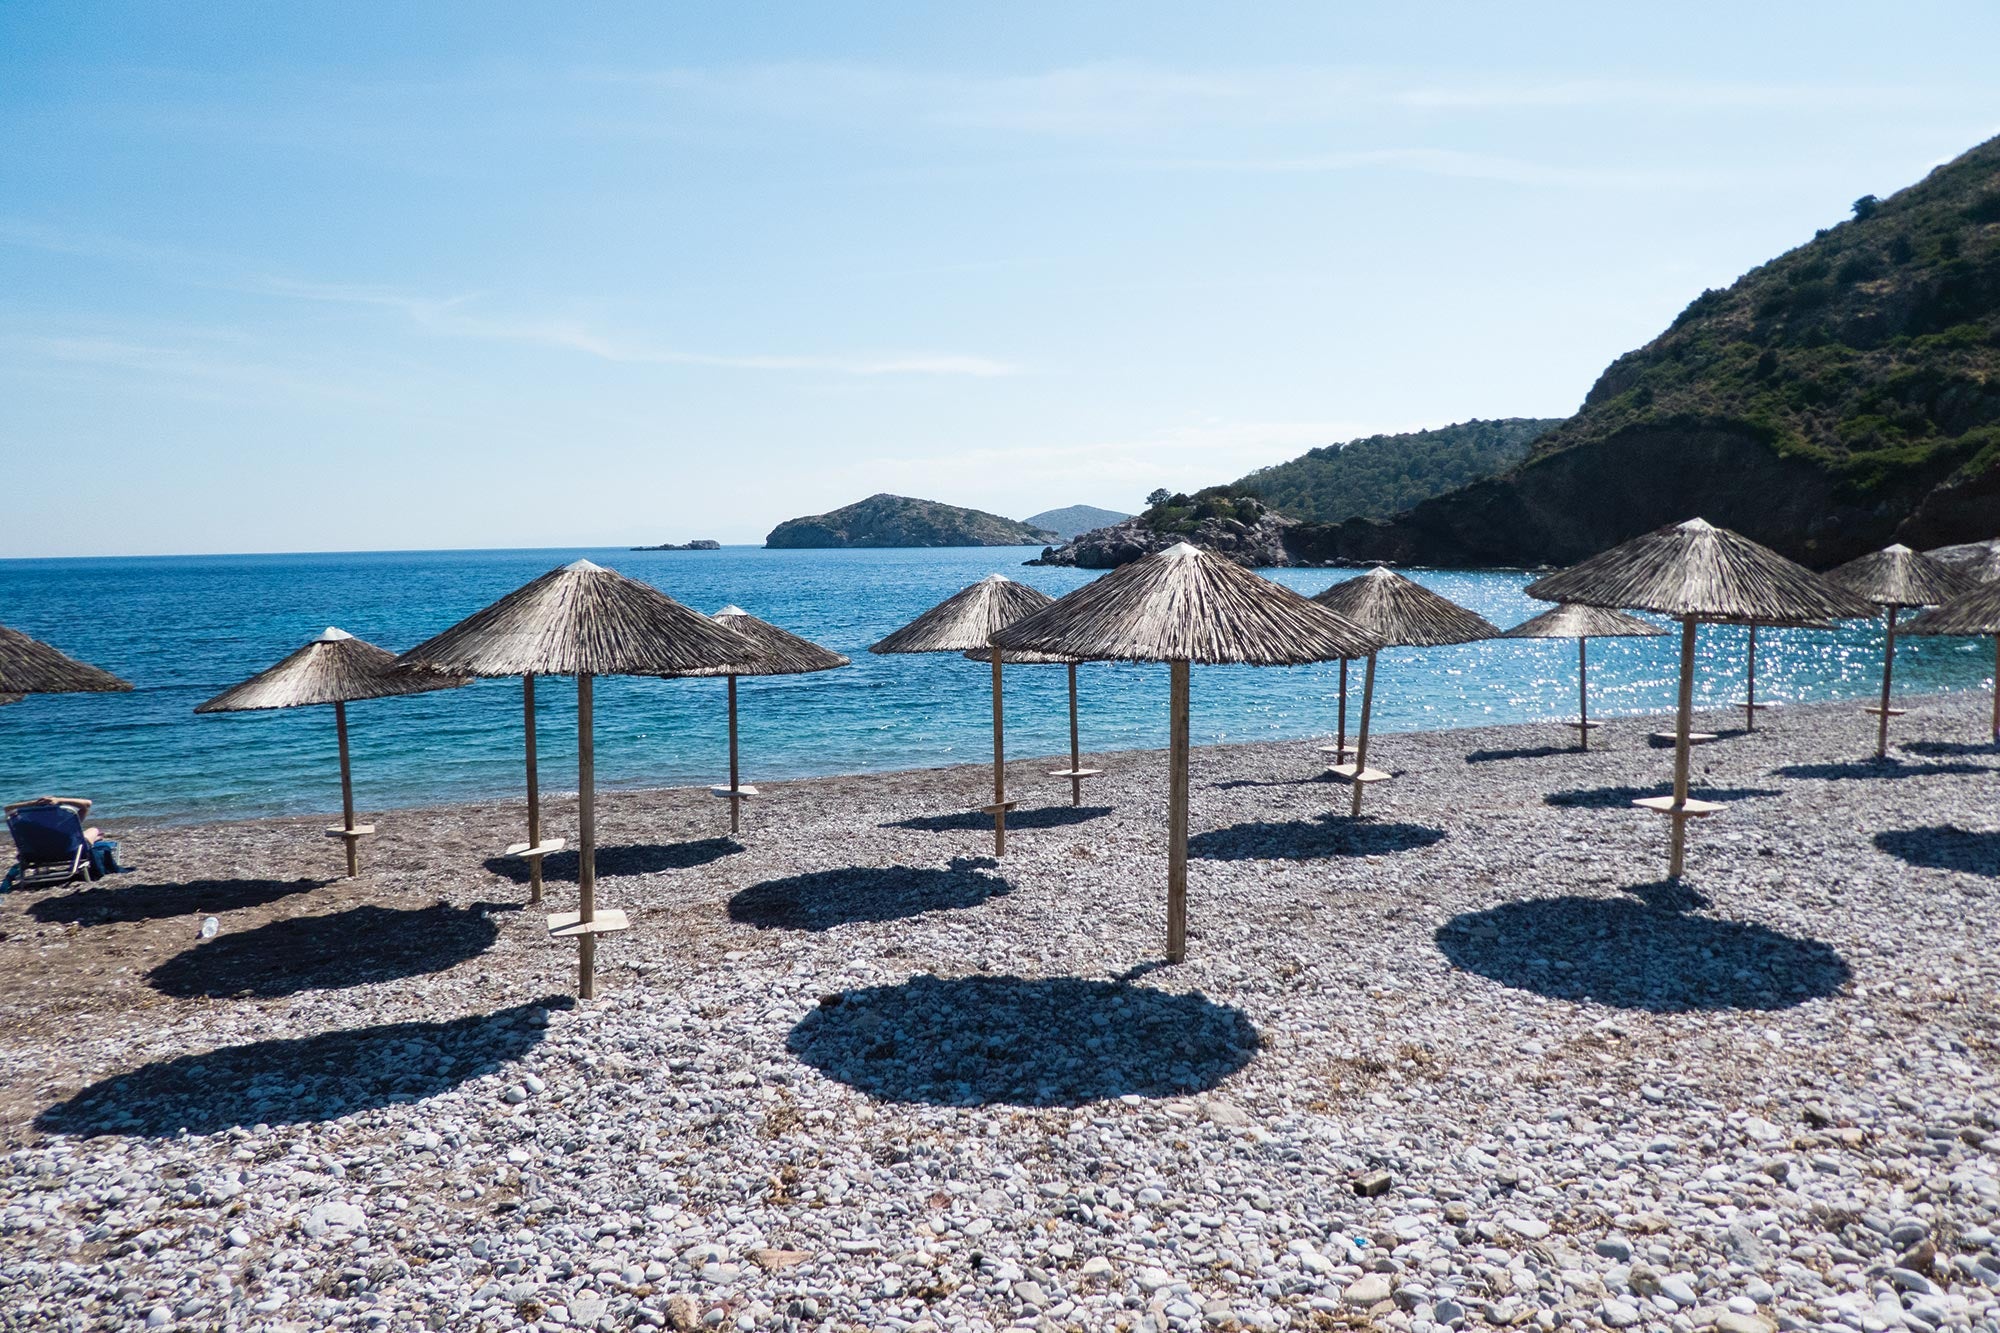 thatched umbrellas on a beautiful beach in Hydra, Greece